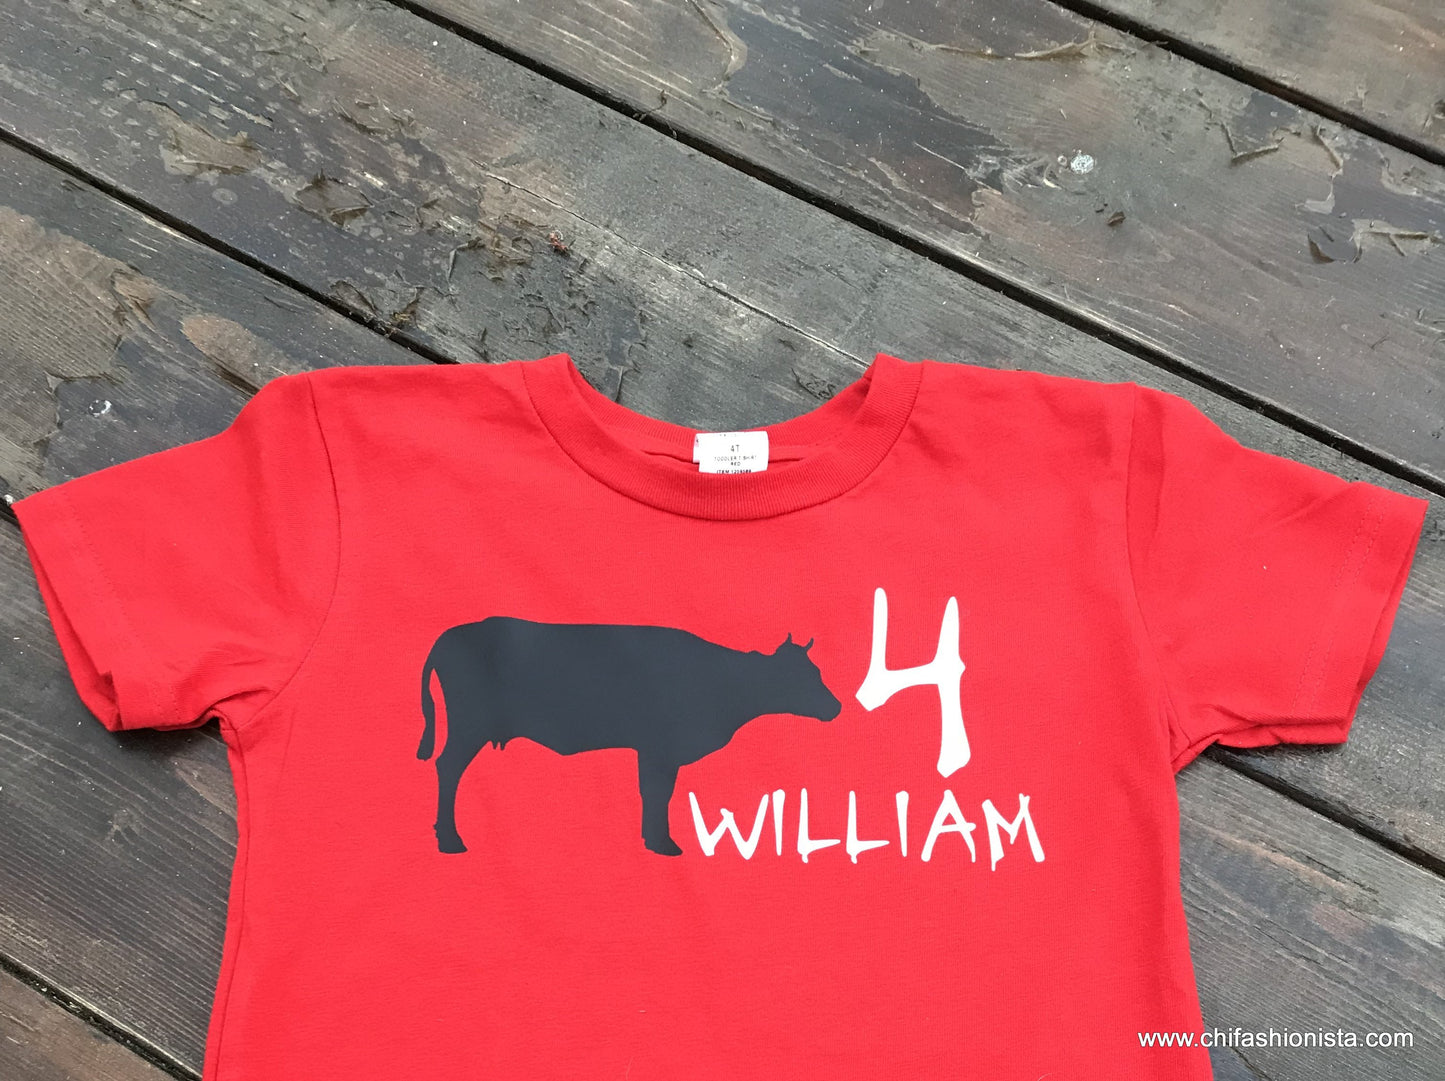 Handcrafted Children's Clothing, Clothing for Children and Parents, Cow Birthday Shirt-Chick-Fil-A Inspired Birthday Shirt, chi-fashionista